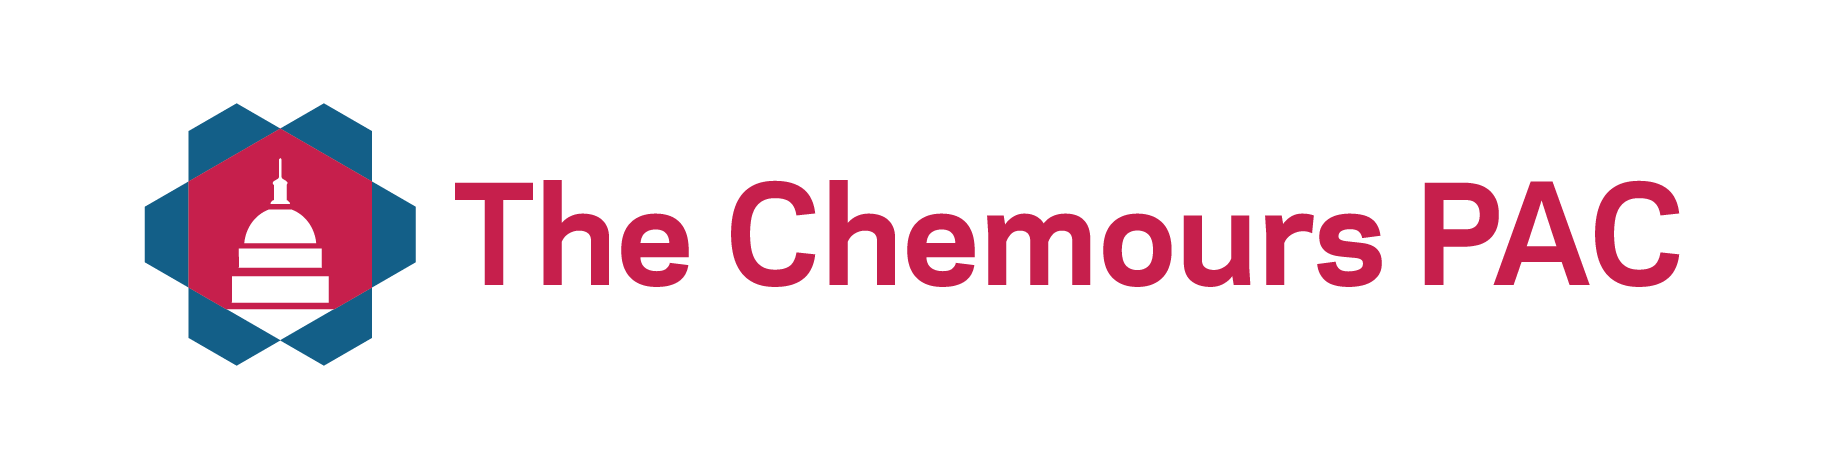 The Chemours PAC